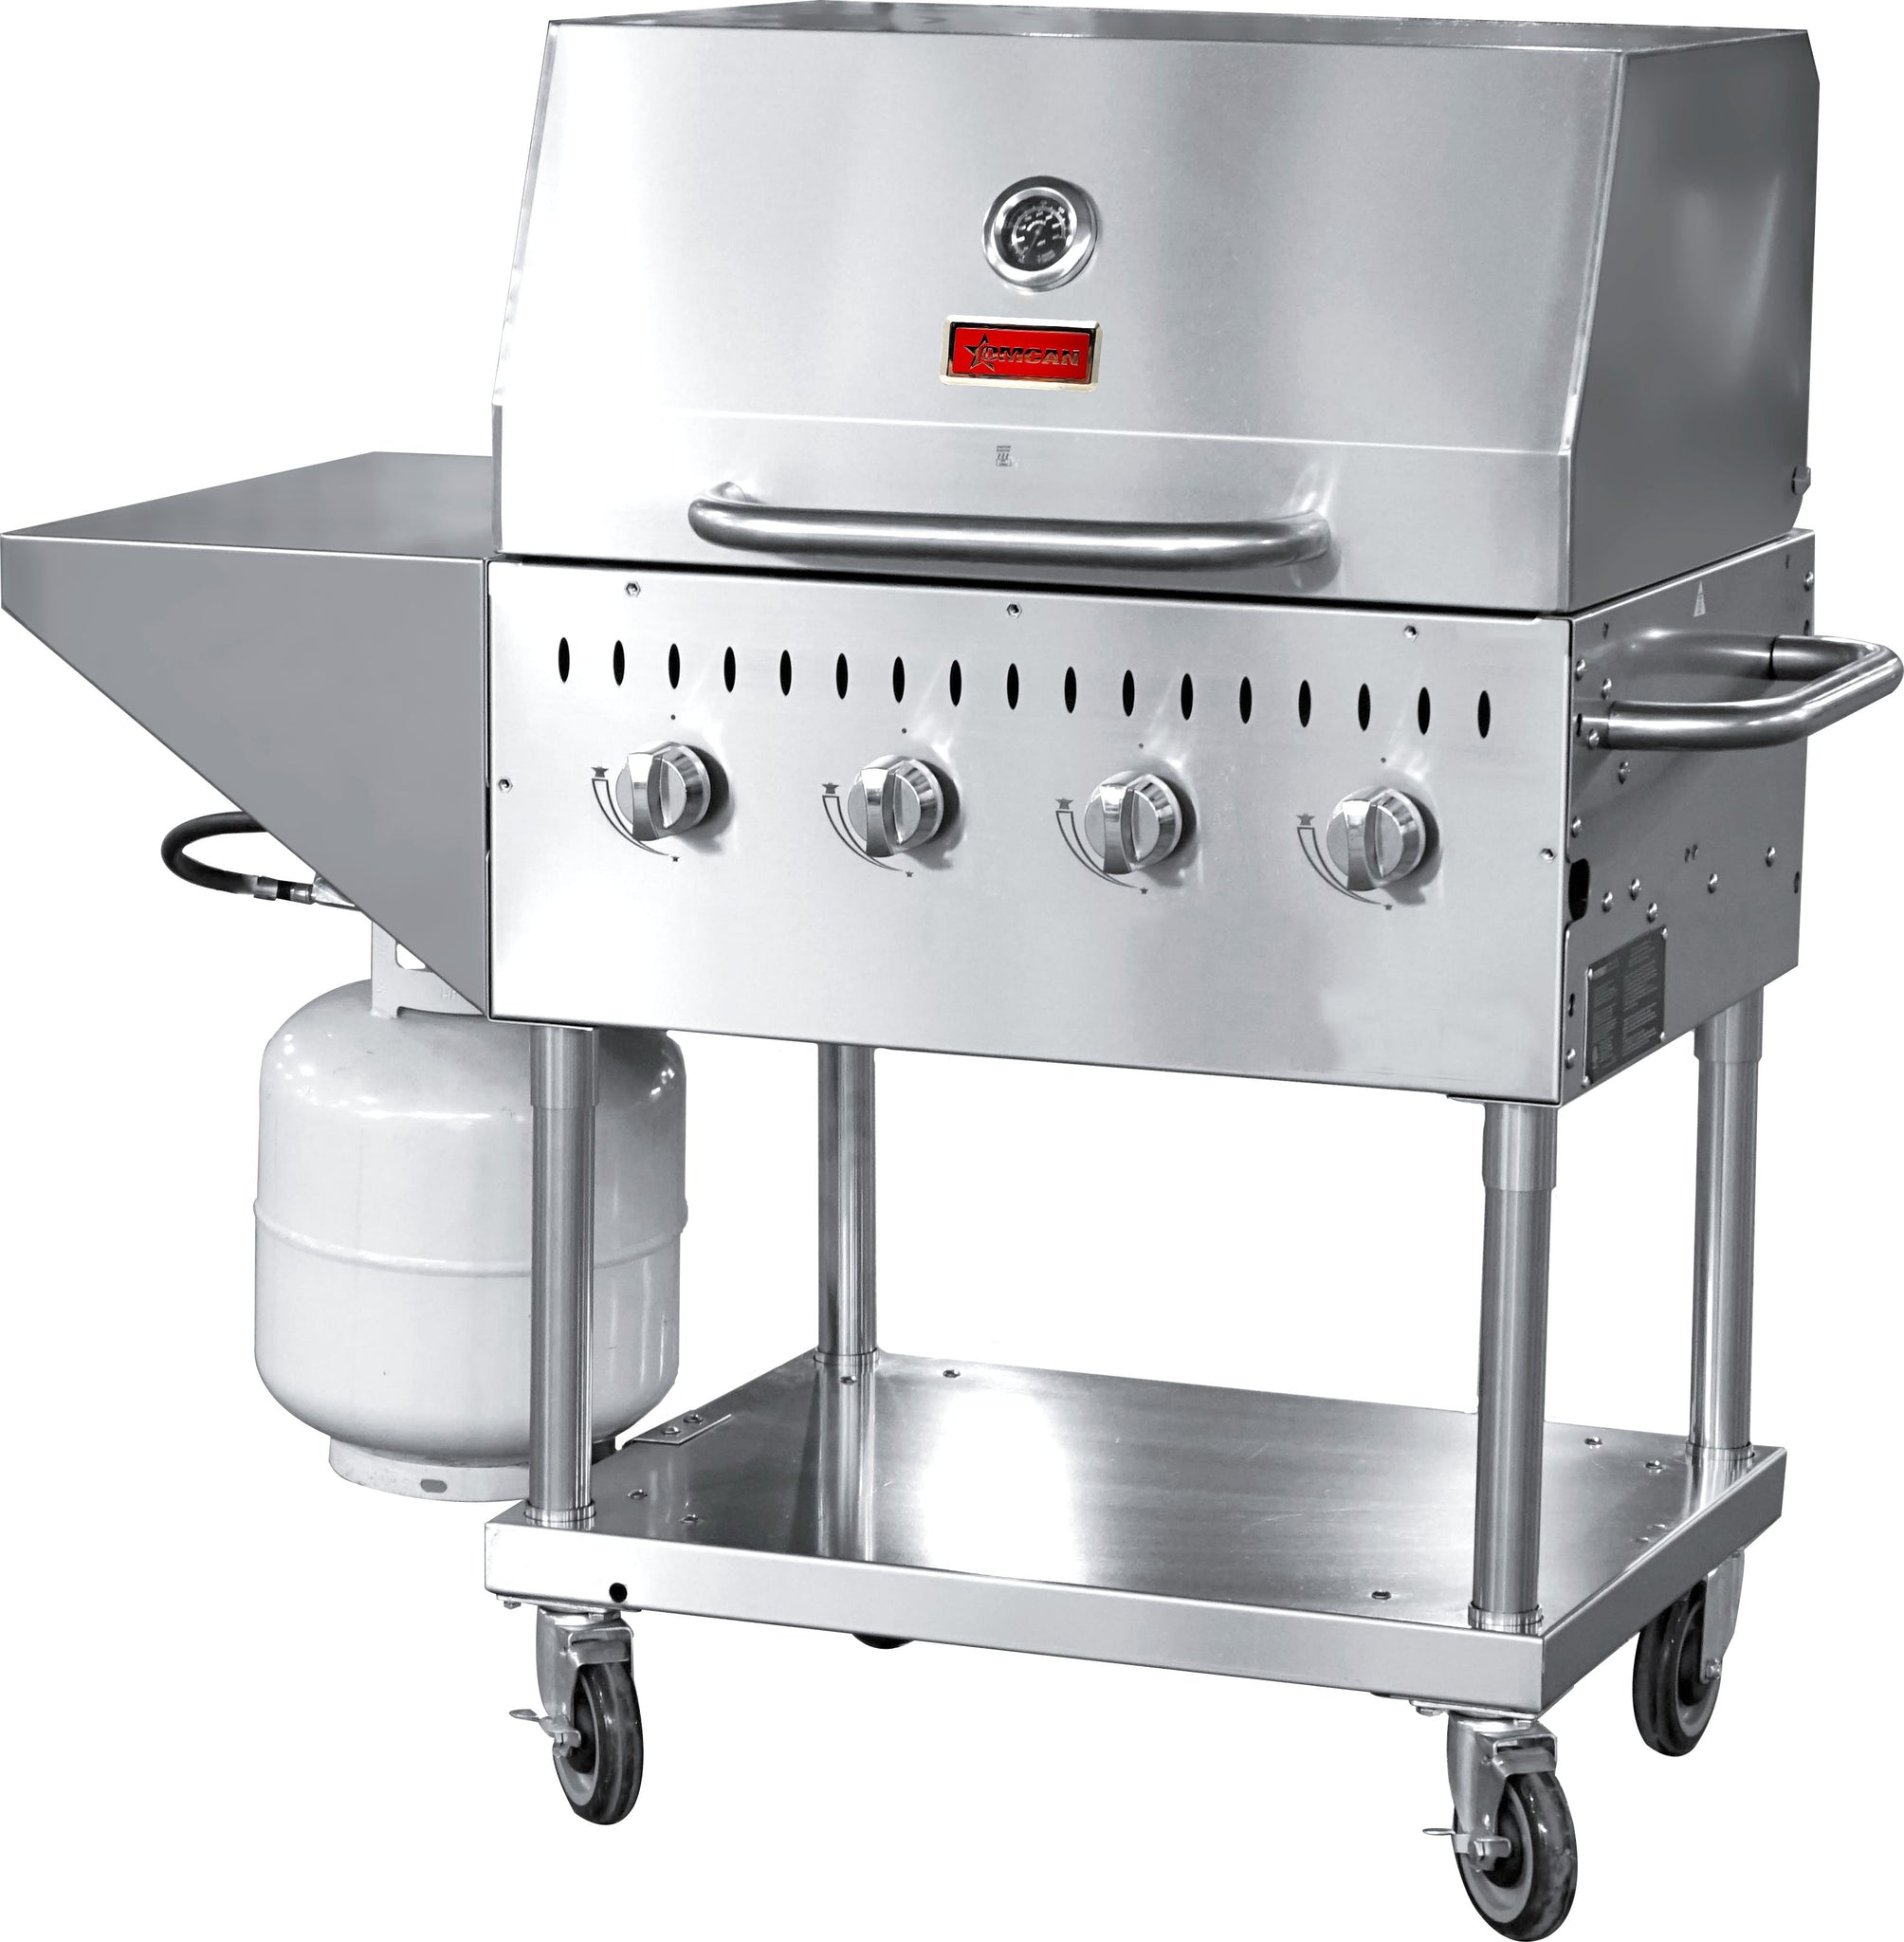 Omcan - Stainless Steel 4 Burners Propane Outdoor BBQ Grill with Top And Side Shelf - CE-CN-0030-S LP